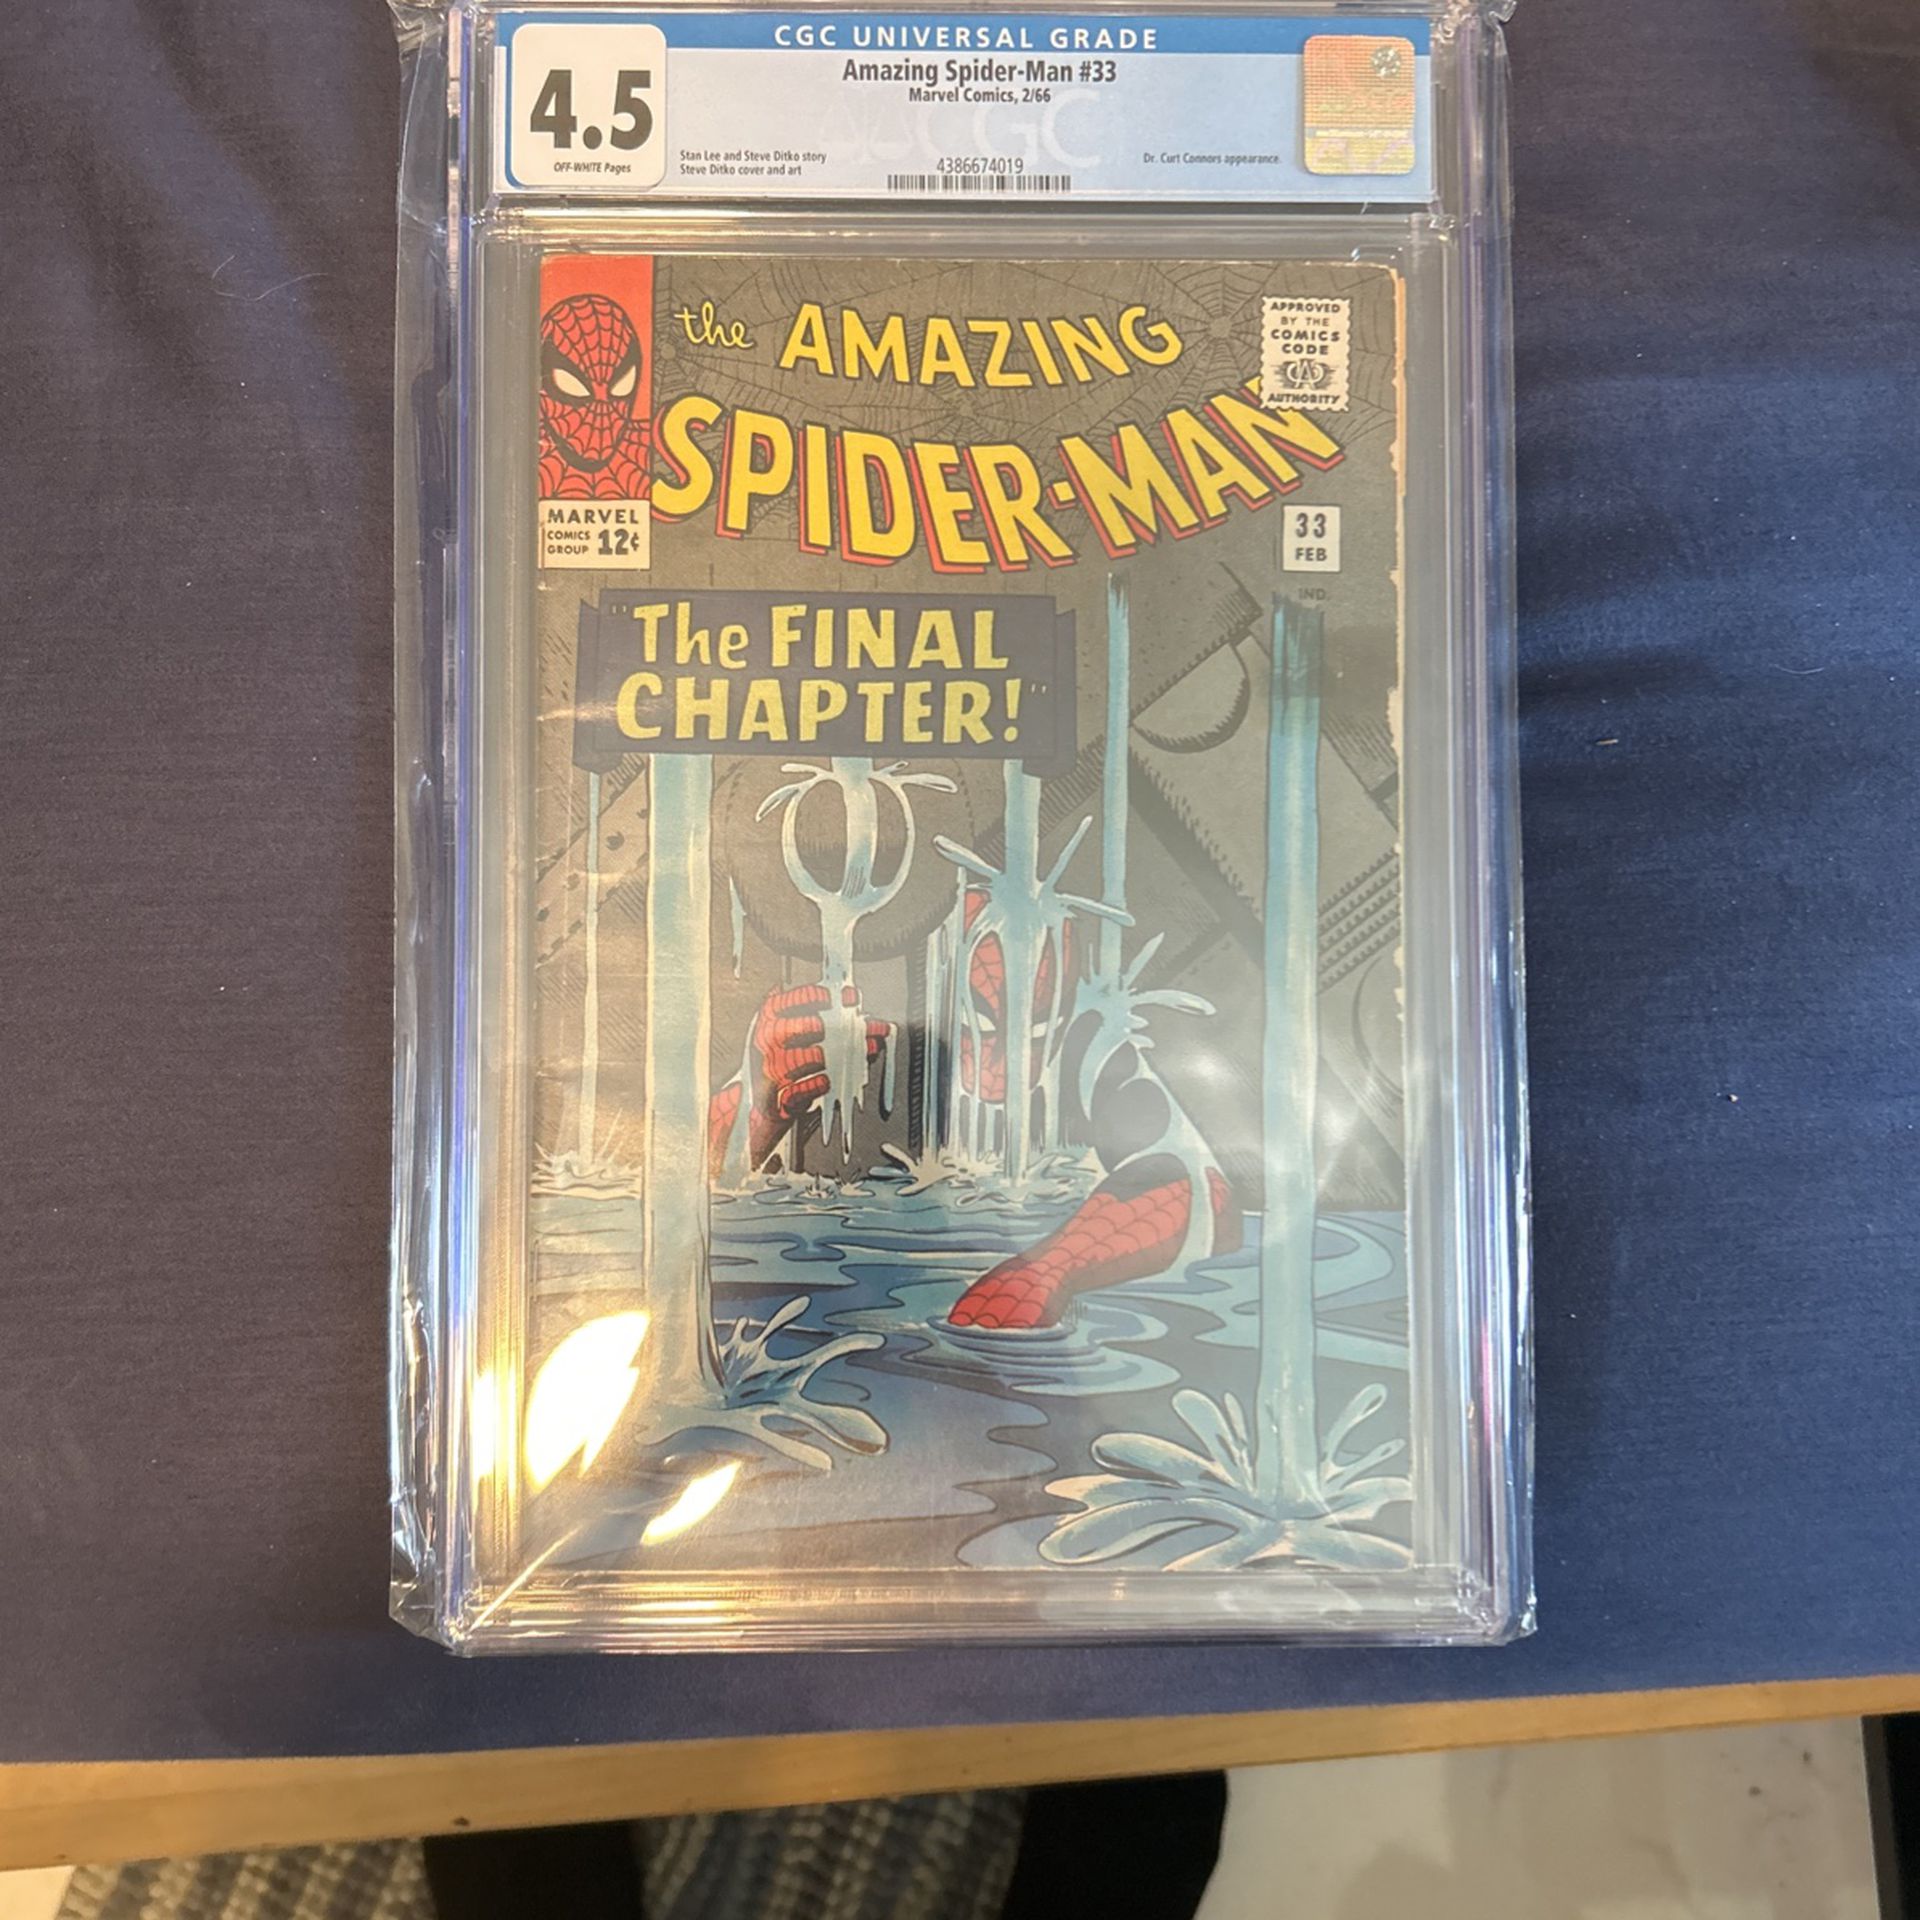 Amazing Spider-man The Final Chapter #33